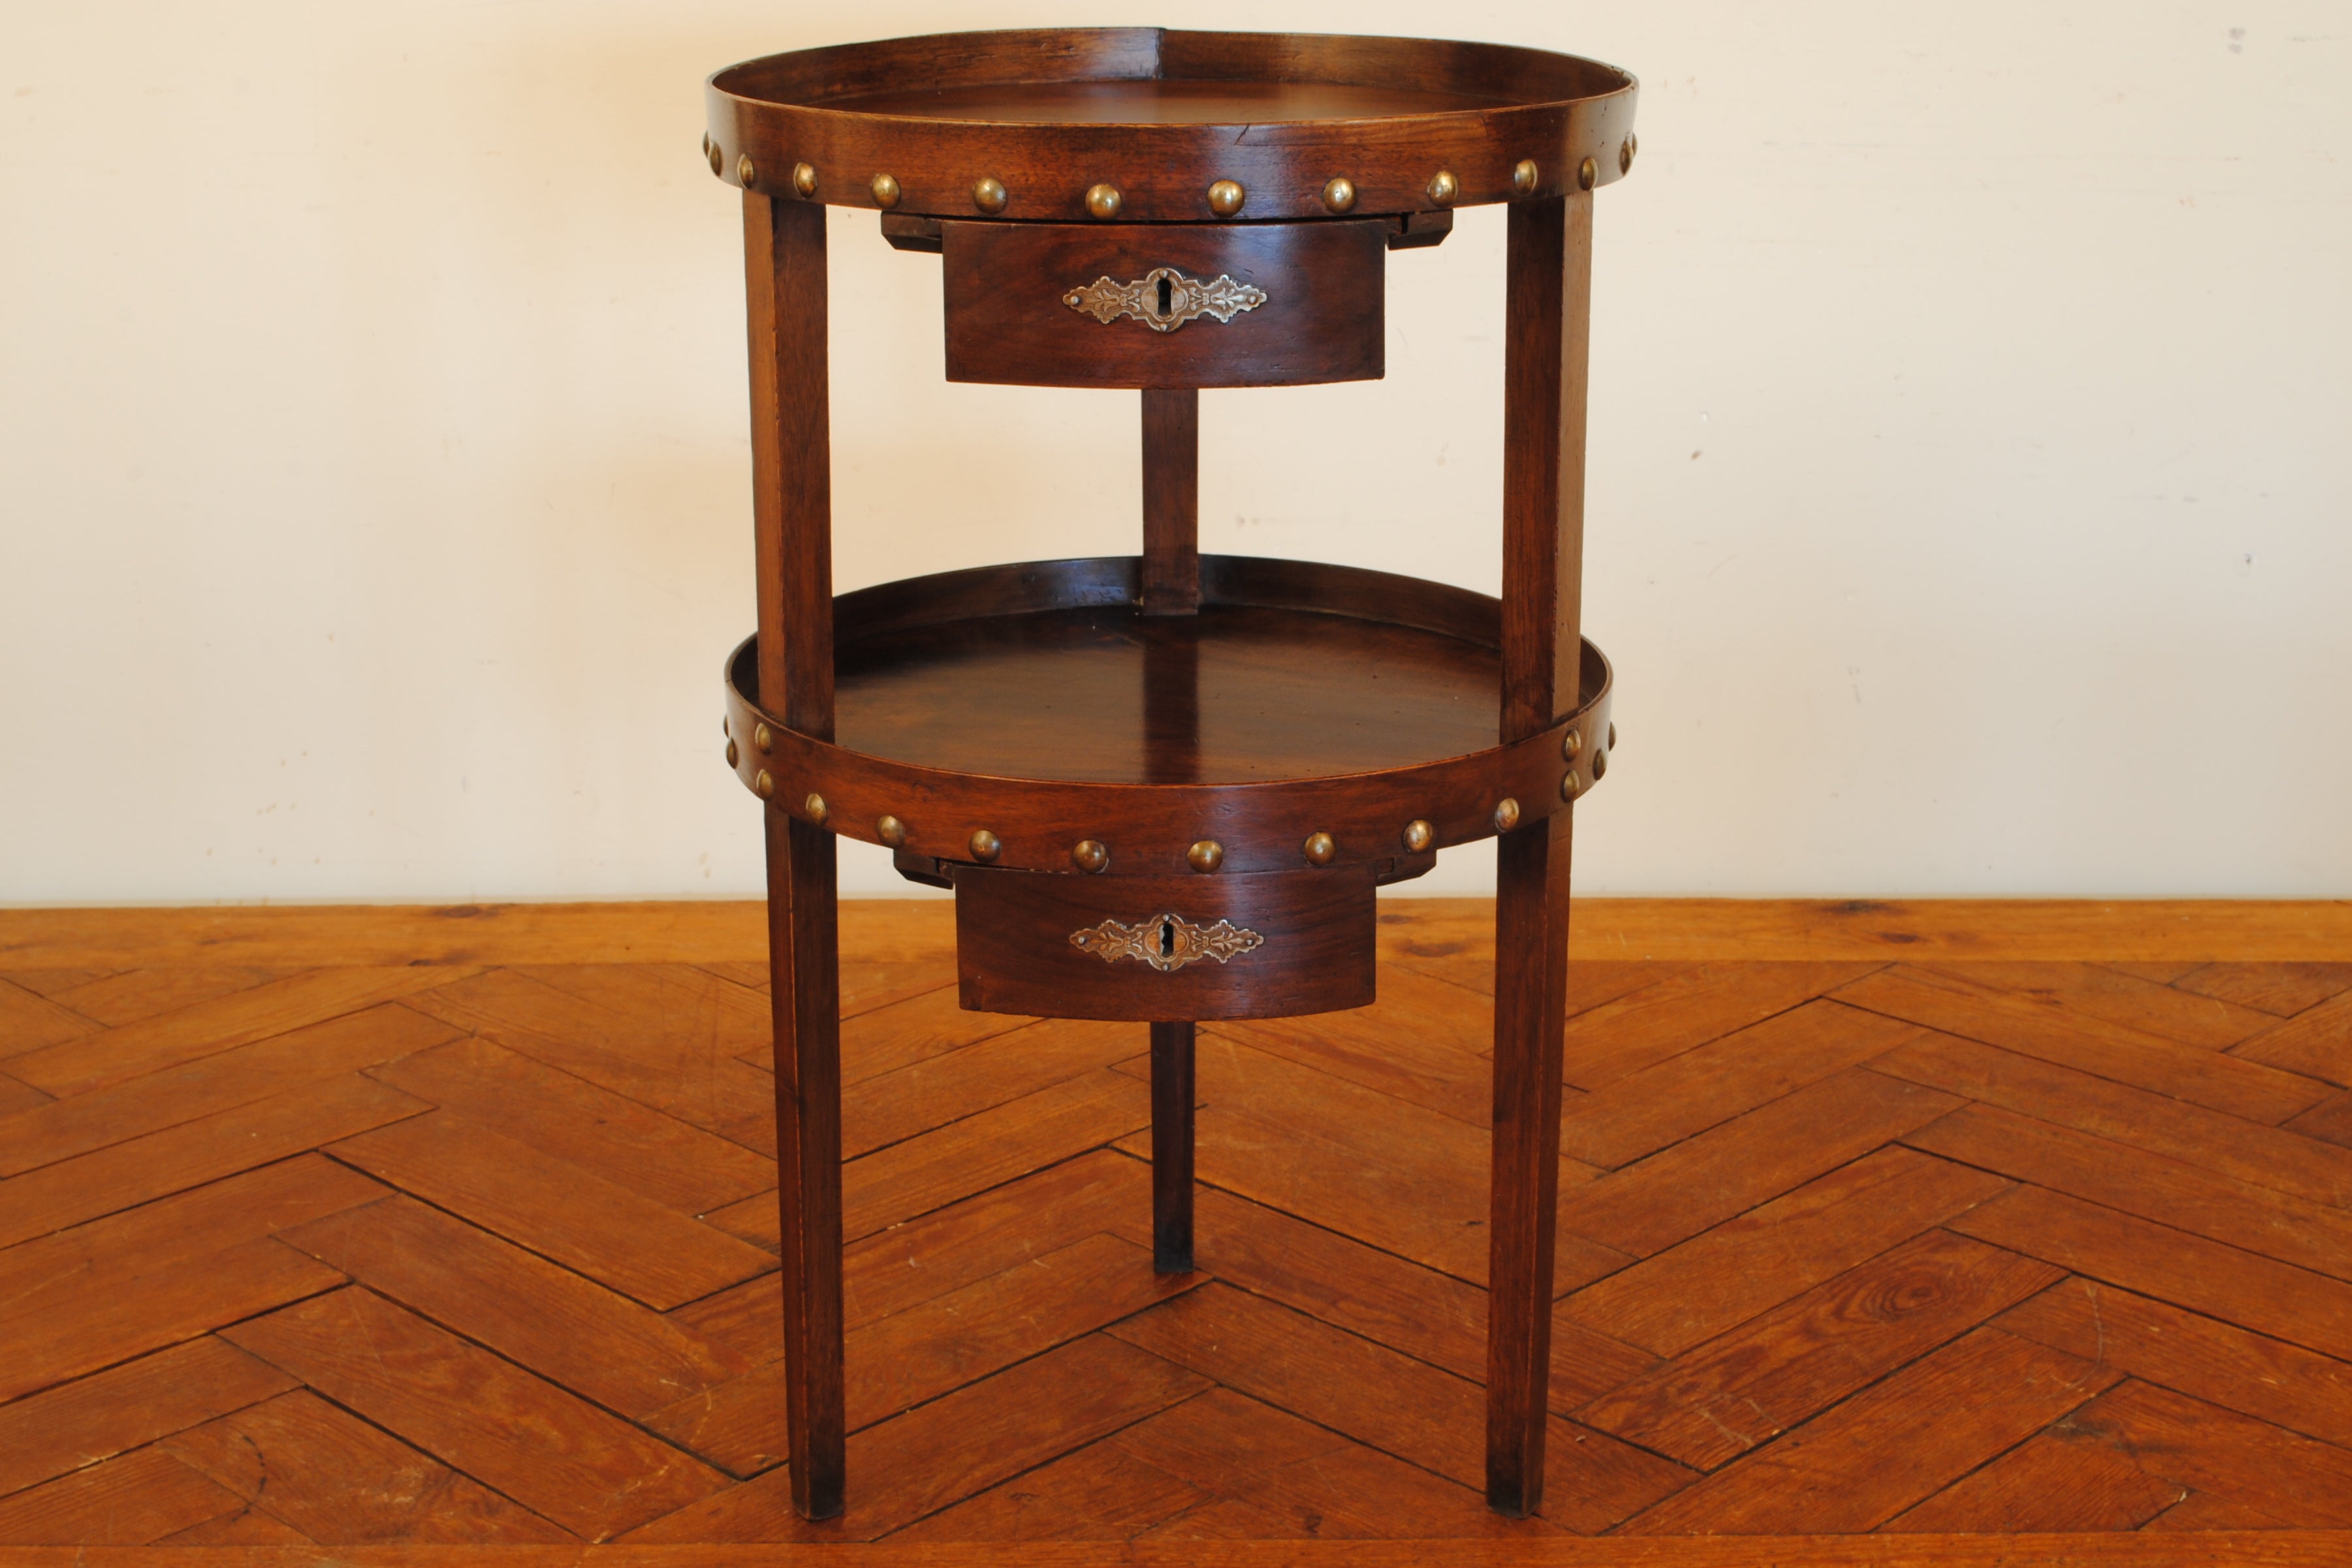 A French Walnut 19th Century Late Neoclassical 3-Leg, 2 Drawer Table